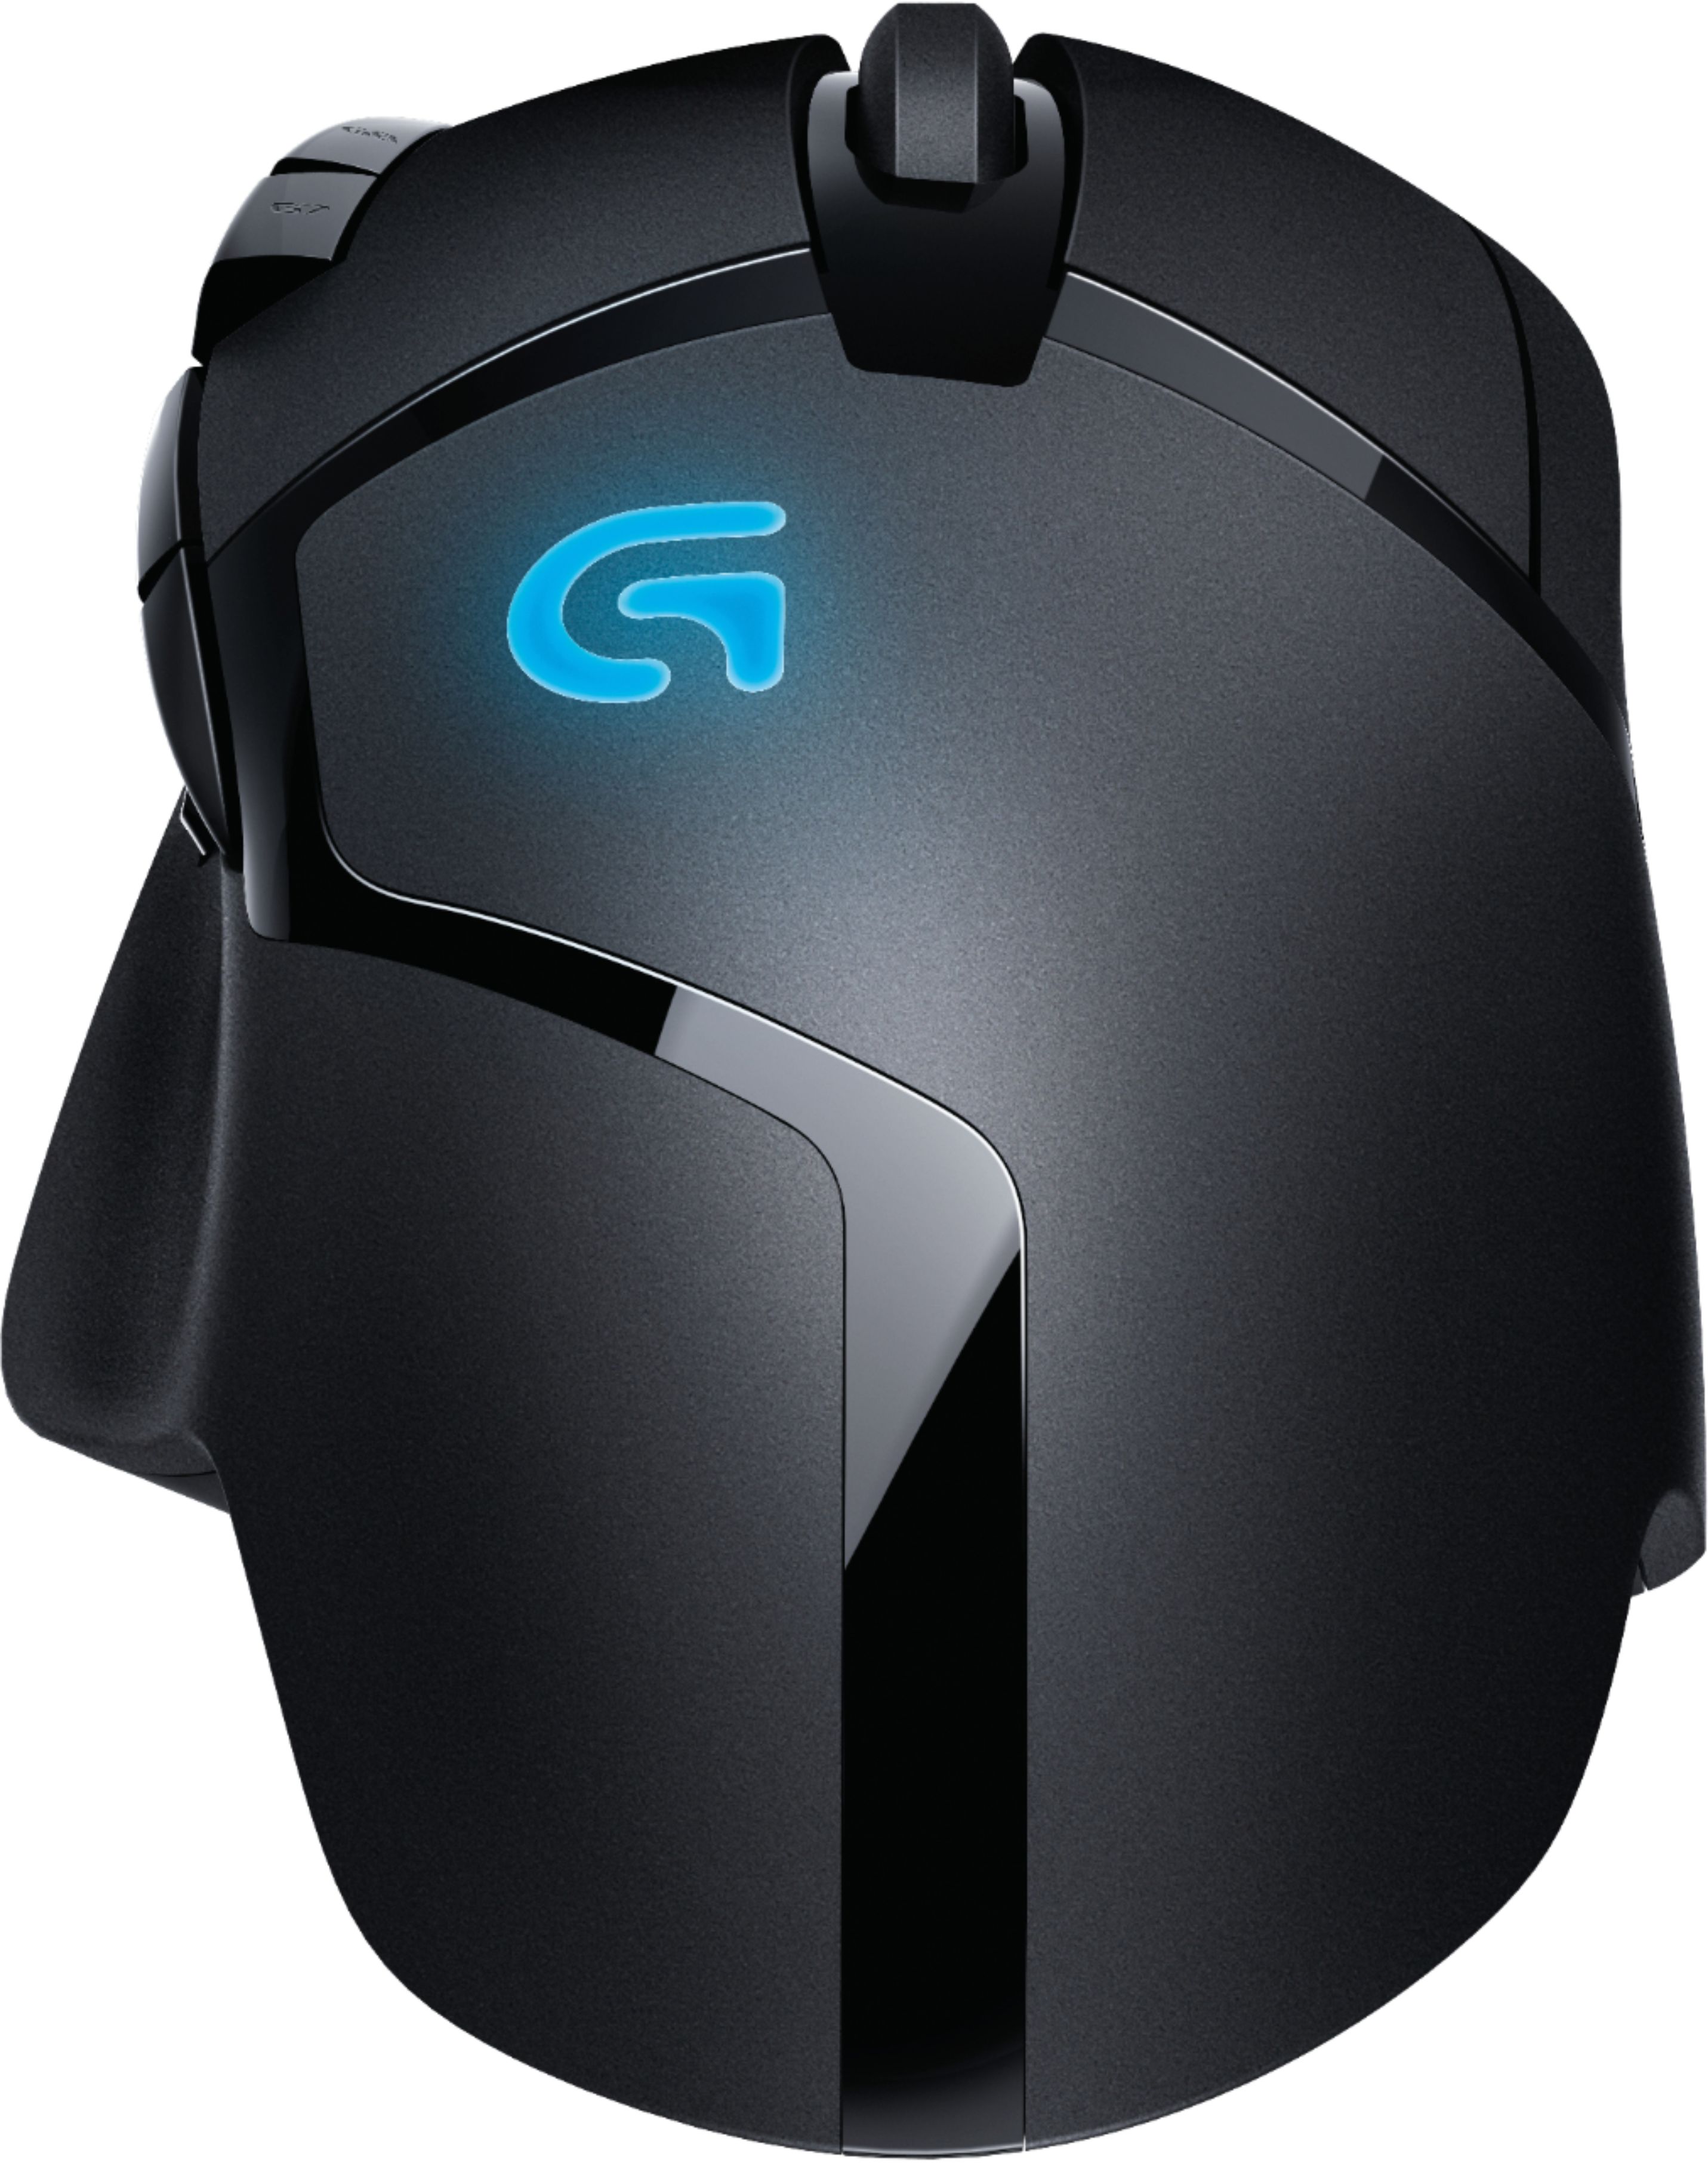 Logitech G402 Hyperion Optical Gaming Mouse 910-004069 Best Buy